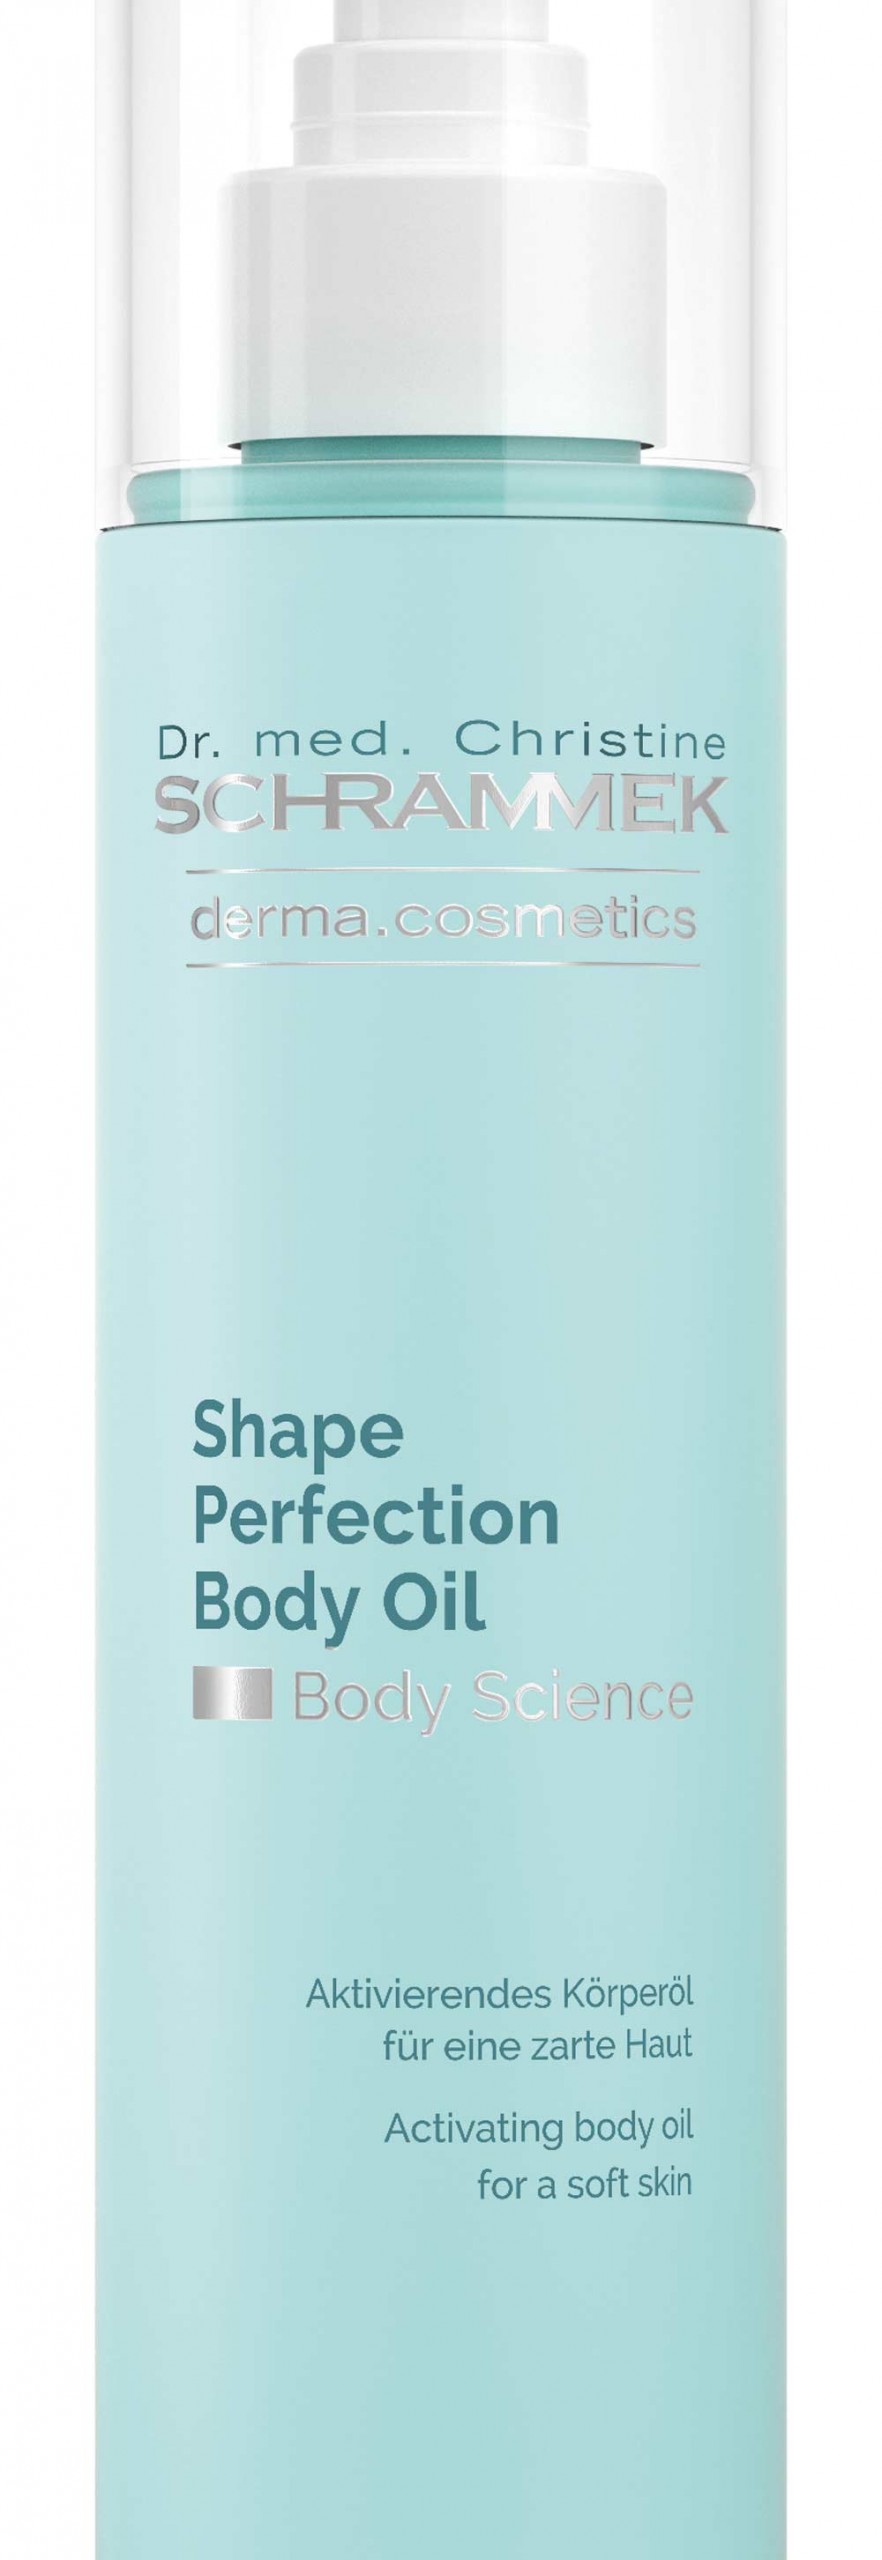 Shape-Perfection-Body-Oil